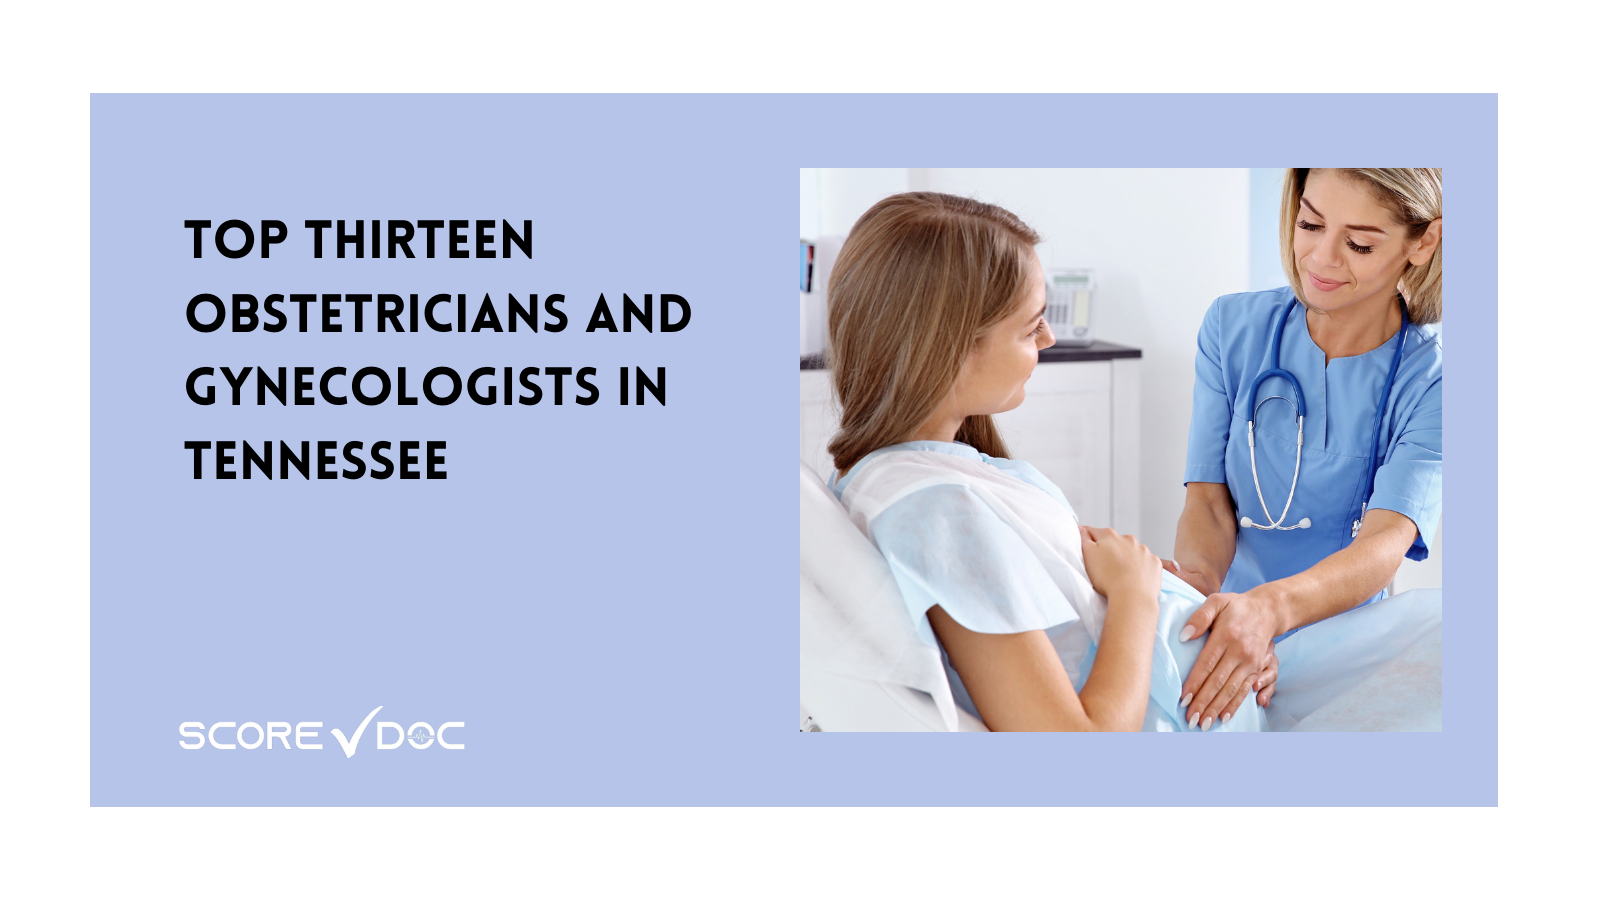 TOP THIRTEEN
OBSTETRICIANS AND
GYNECOLOGISTS IN
TENNESSEE